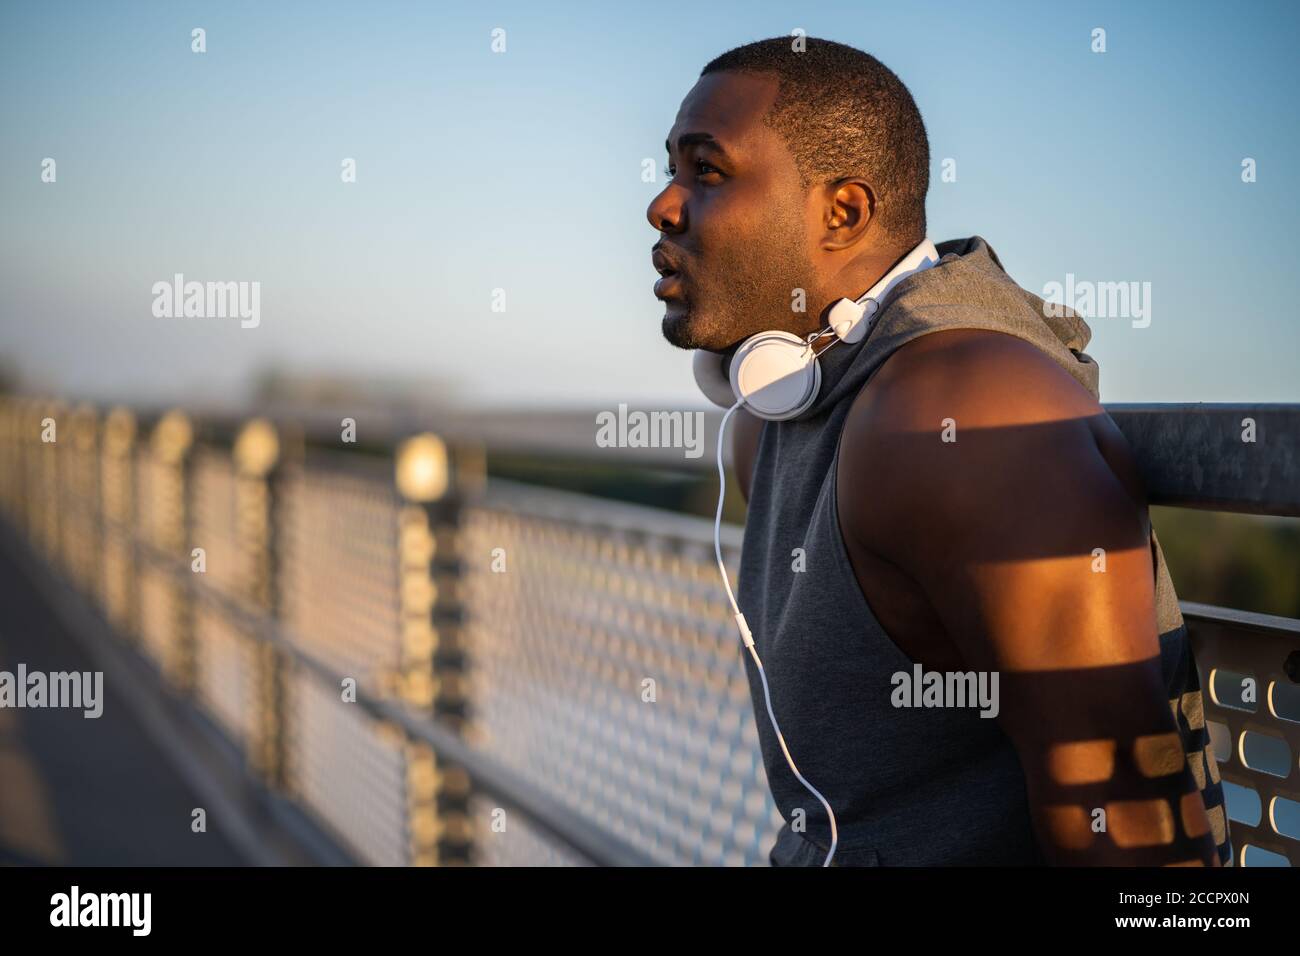 Portrait of young cheerful african-american man in sports clothing who is relaxing after jogging. Stock Photo